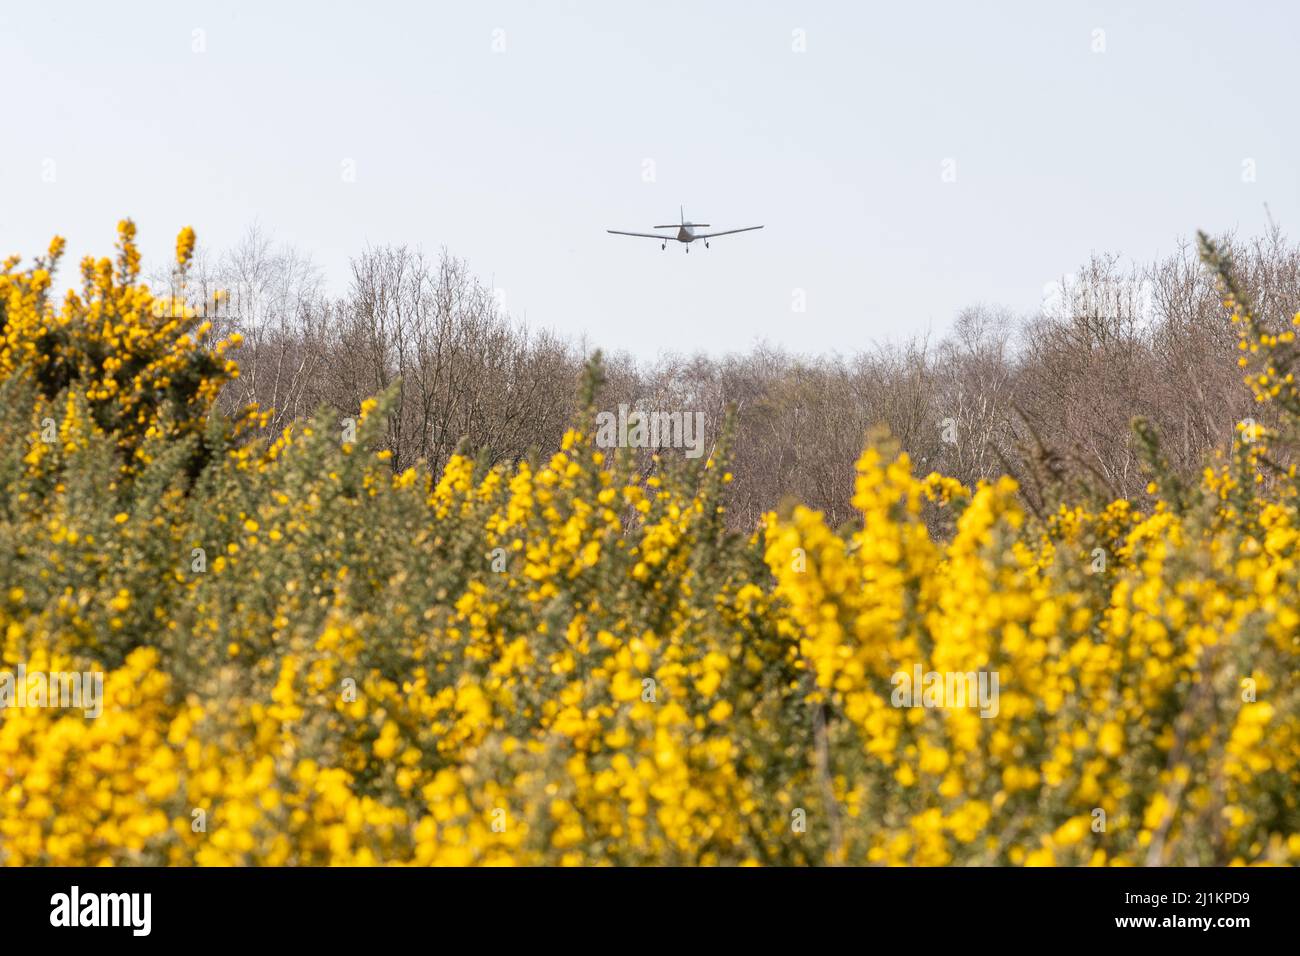 Small airplane flying above yellow gorse bushes coming in to land at Blackbushe Airport, Hampshire, England, UK Stock Photo